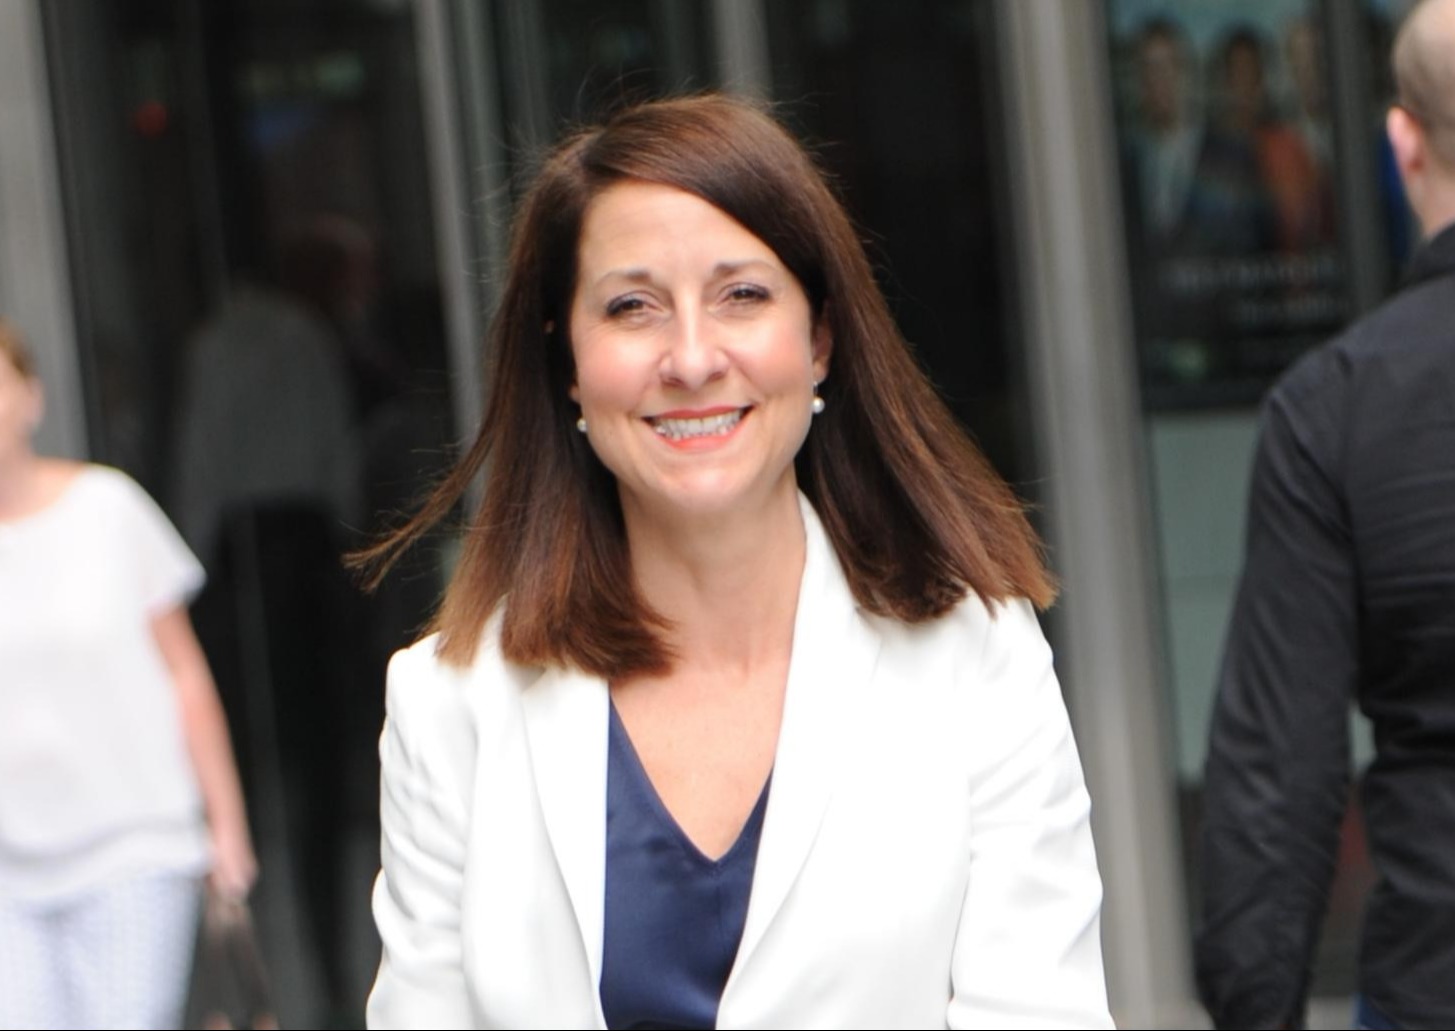 Labour's welfare secretary Liz Kendall says the next generation face losing handouts if they do not take available work